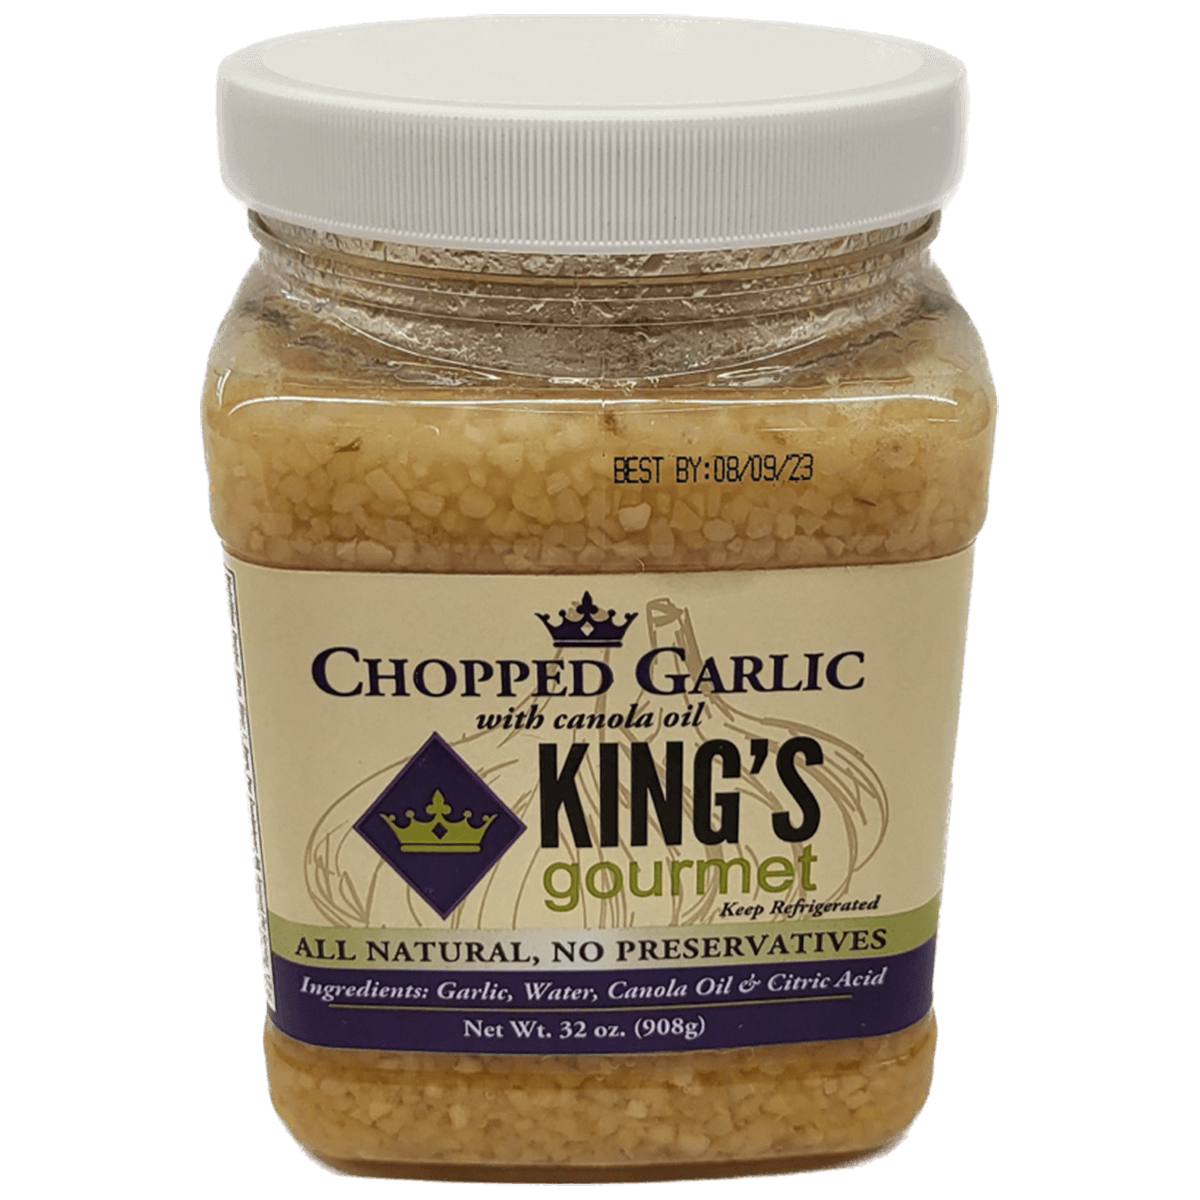 KINGS GOURMET CHOPPED GARLIC WITH CANOLA OIL